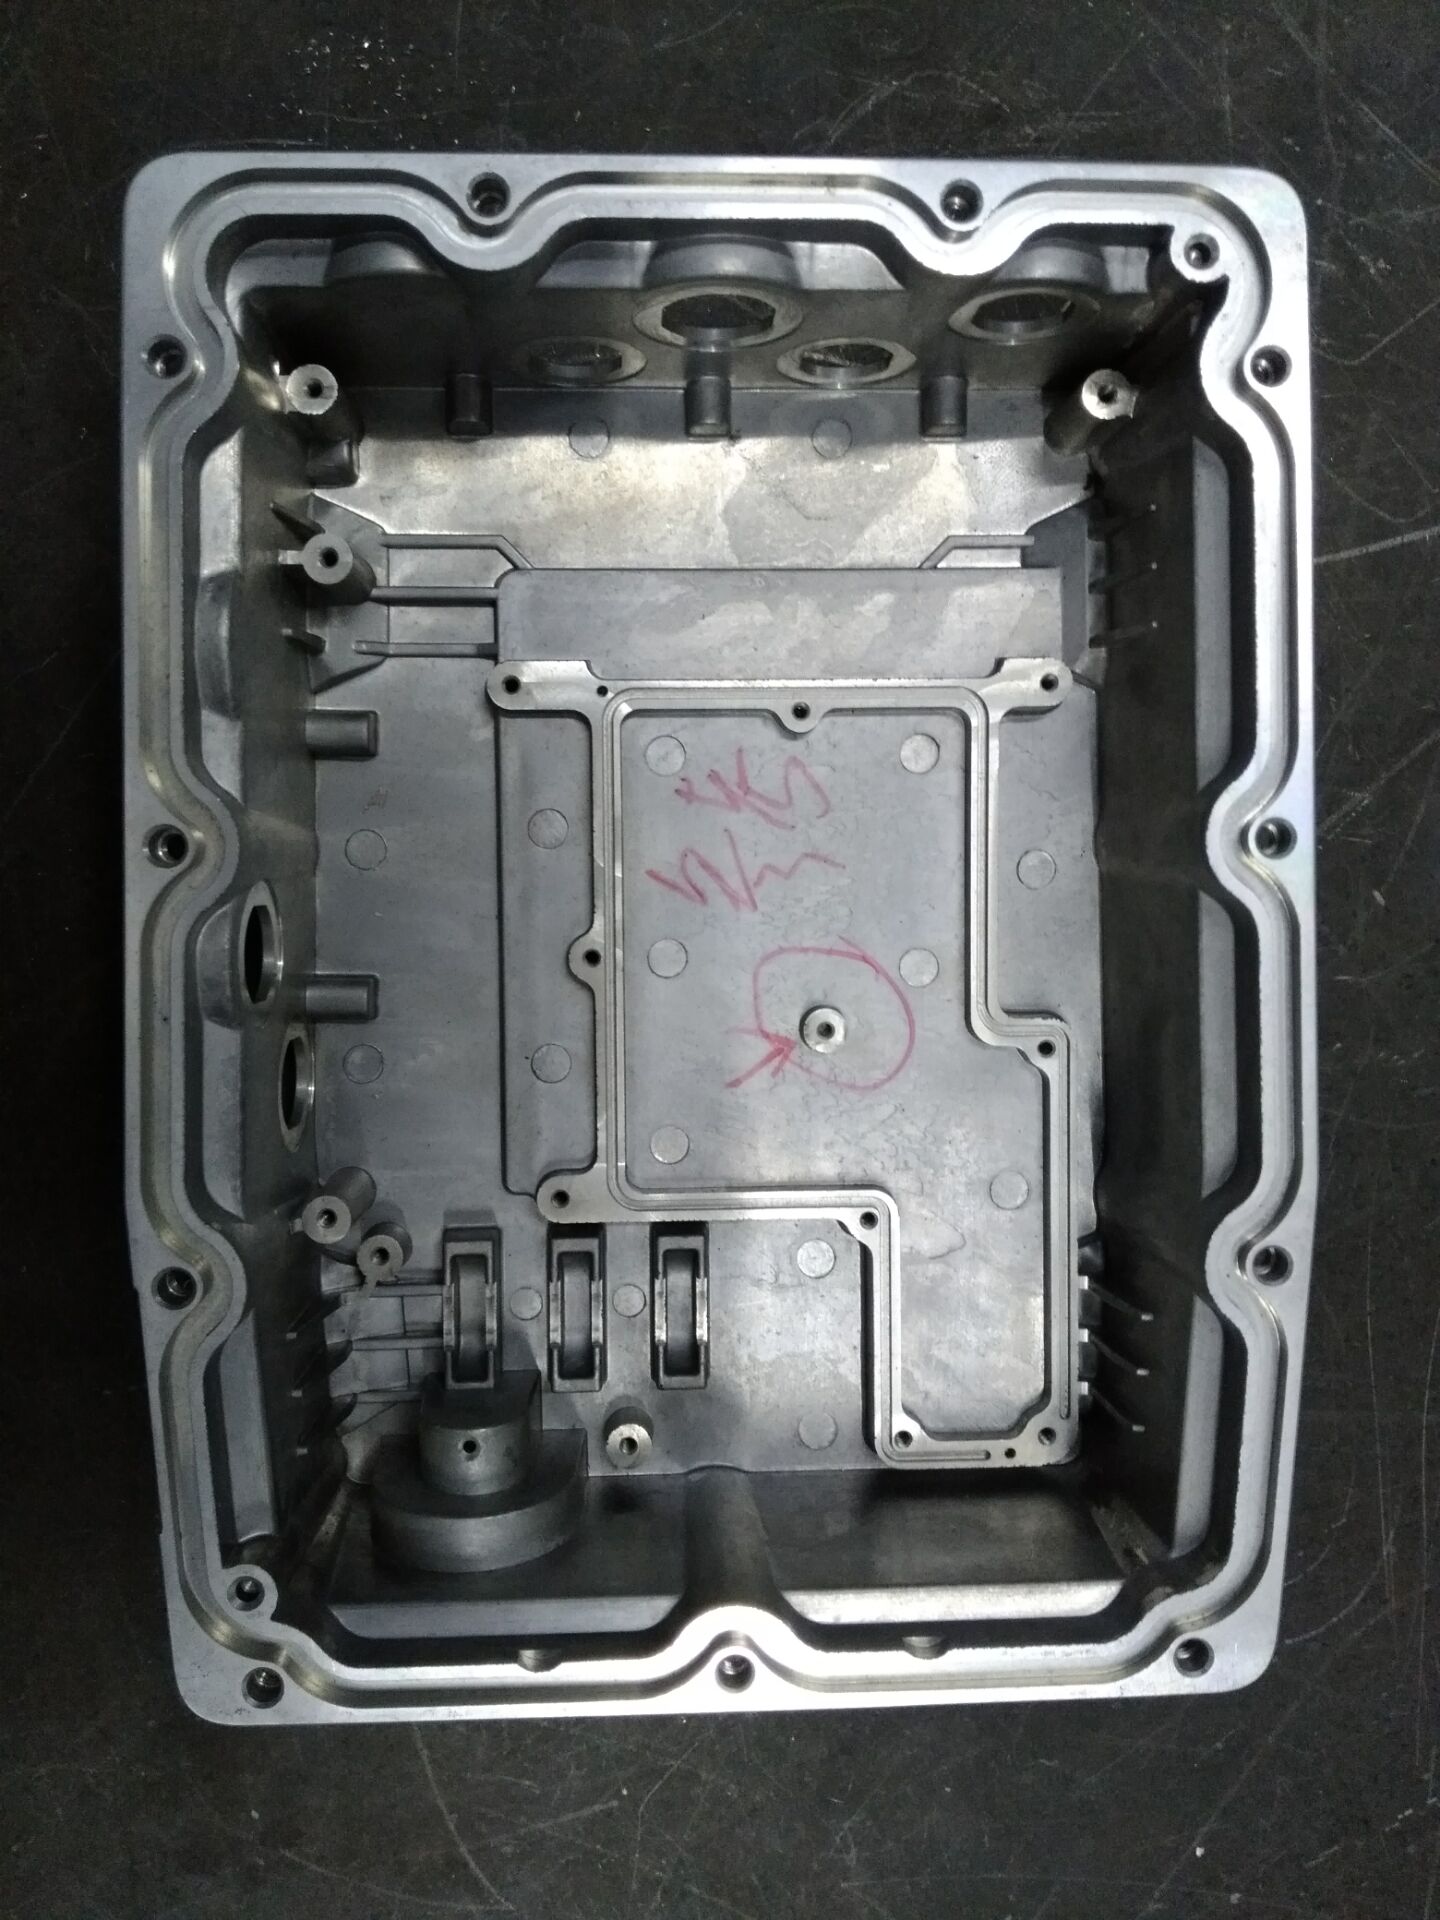 As a plastic mold design factory,what types of tests should be conducted on molds before releasing them to customers?